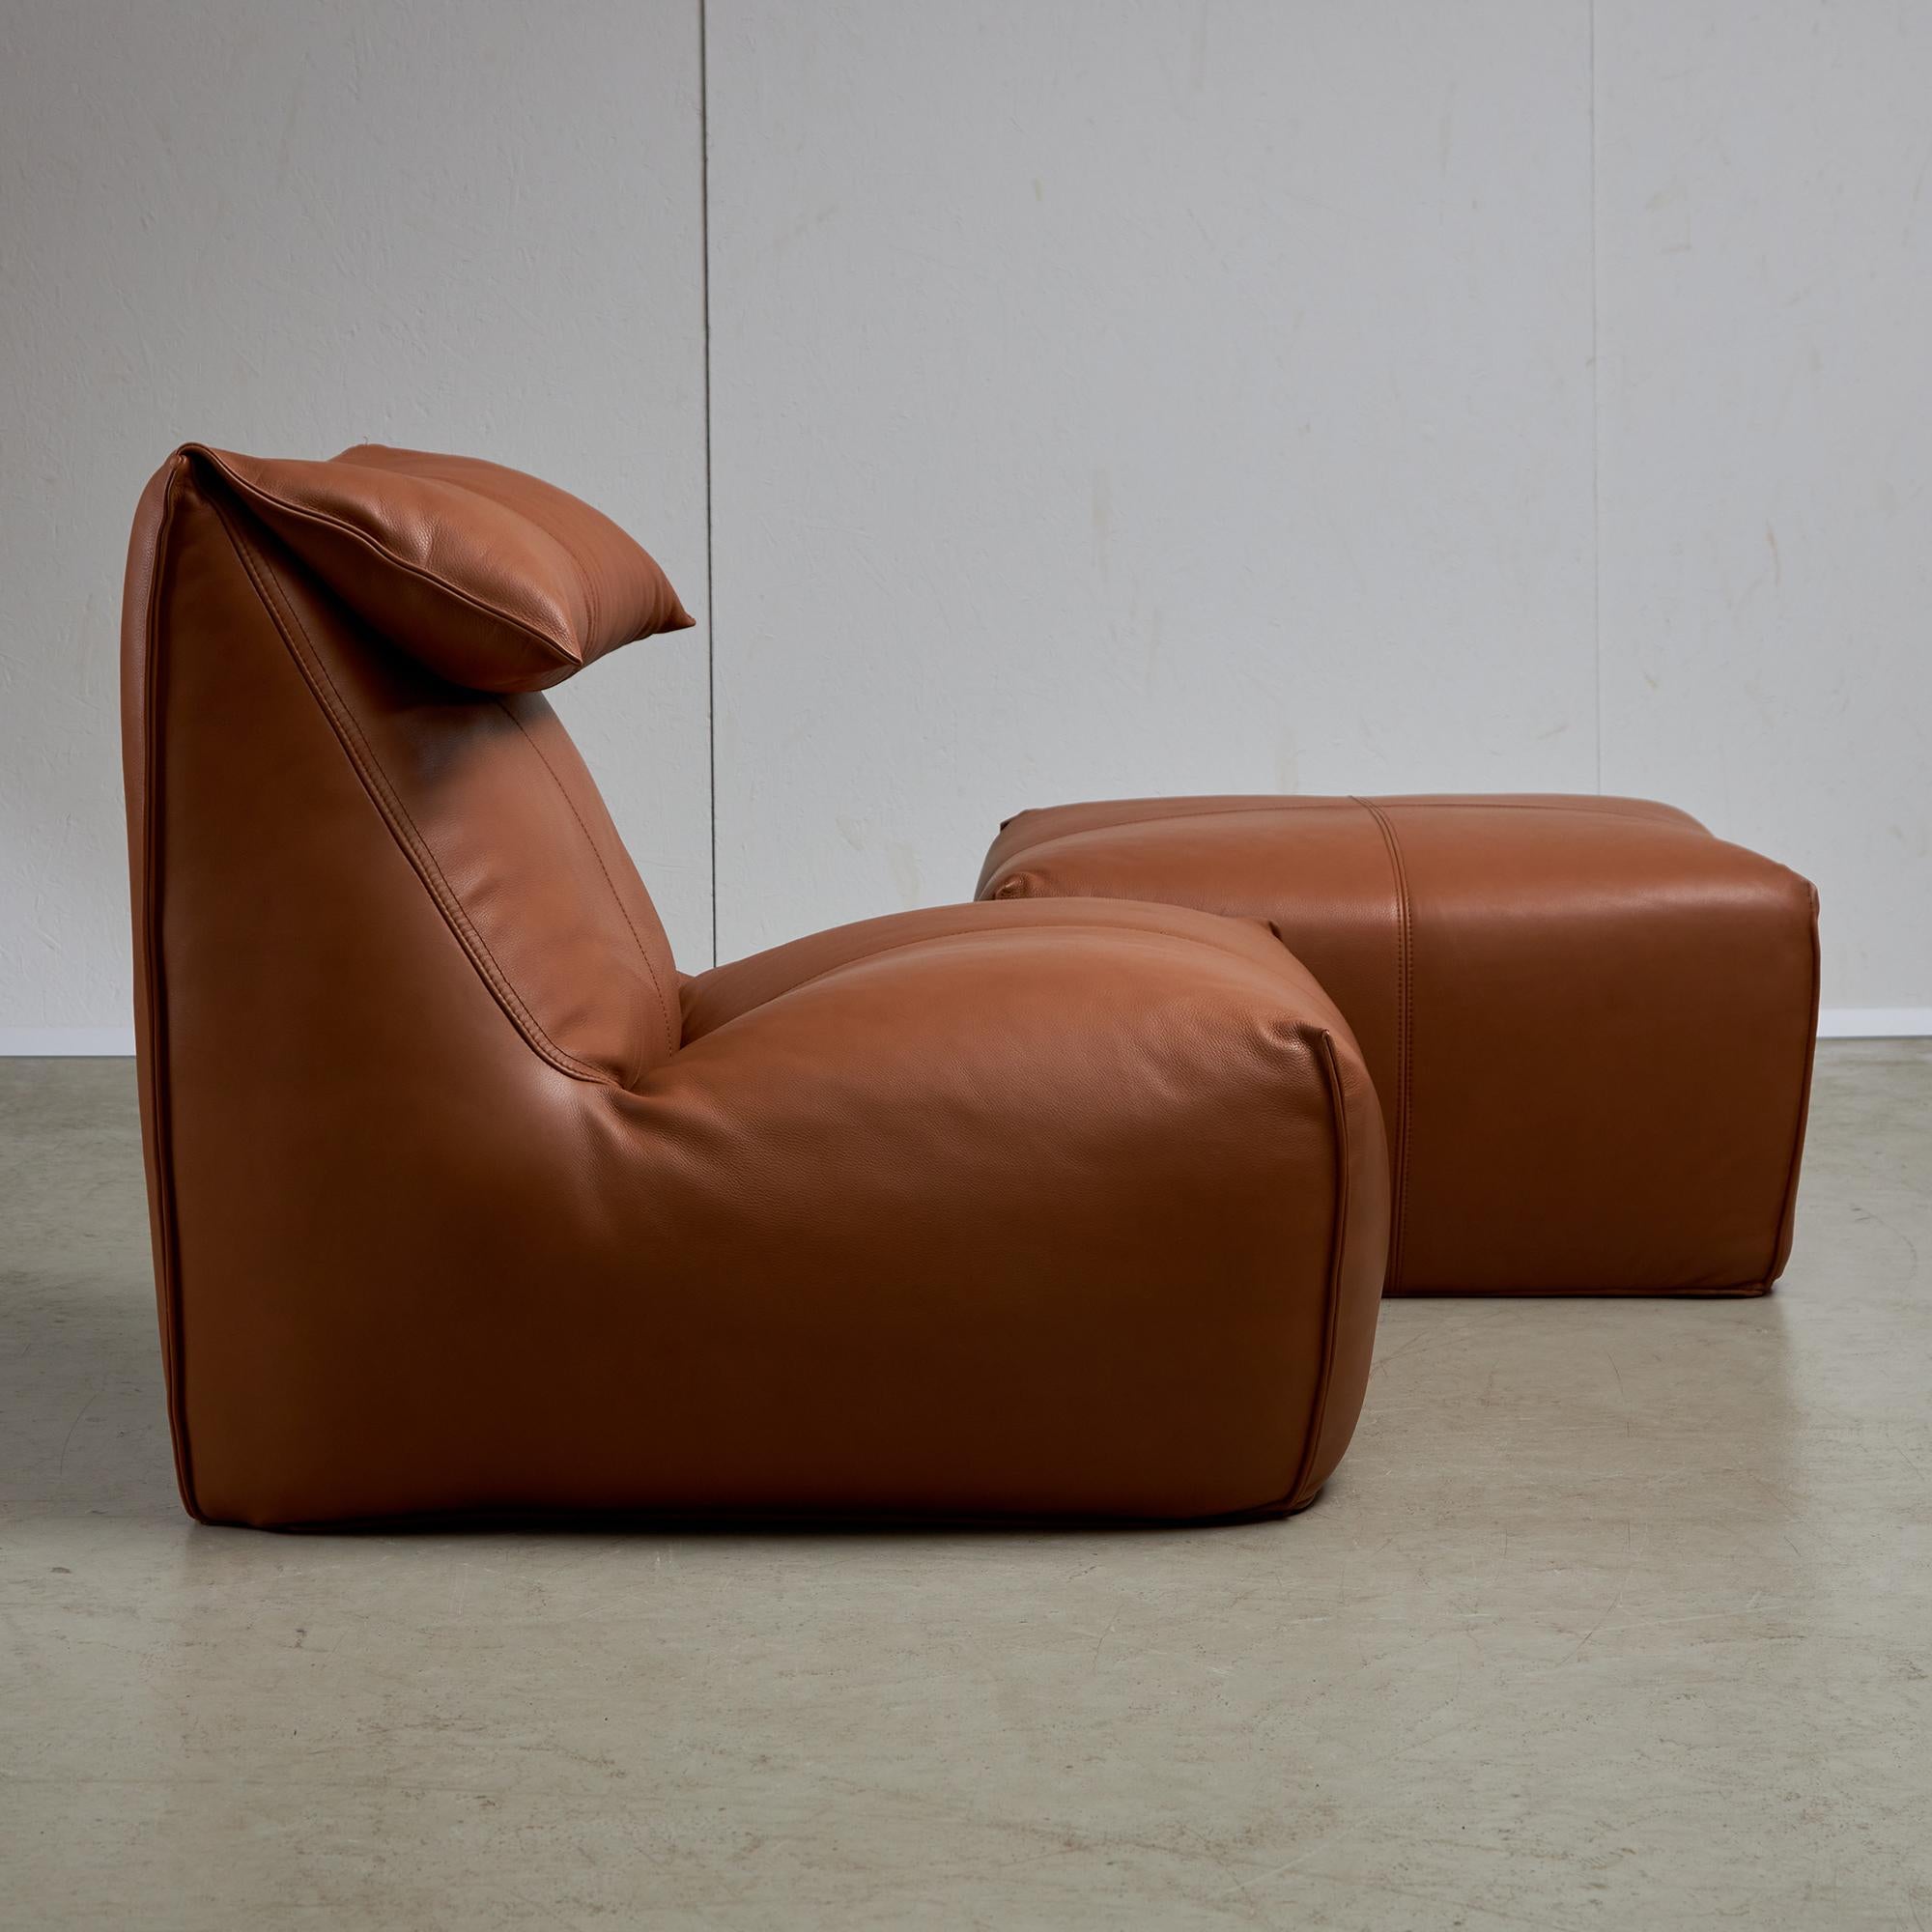 Robust, coffee-brown sponge and leather lounge chair with folding backrest and with a footrest. The Le Bambole lounge chair by Mario Bellini provides a feeling of deep comfort and relaxation. It was designed for B&B Italia in 1972. Available in